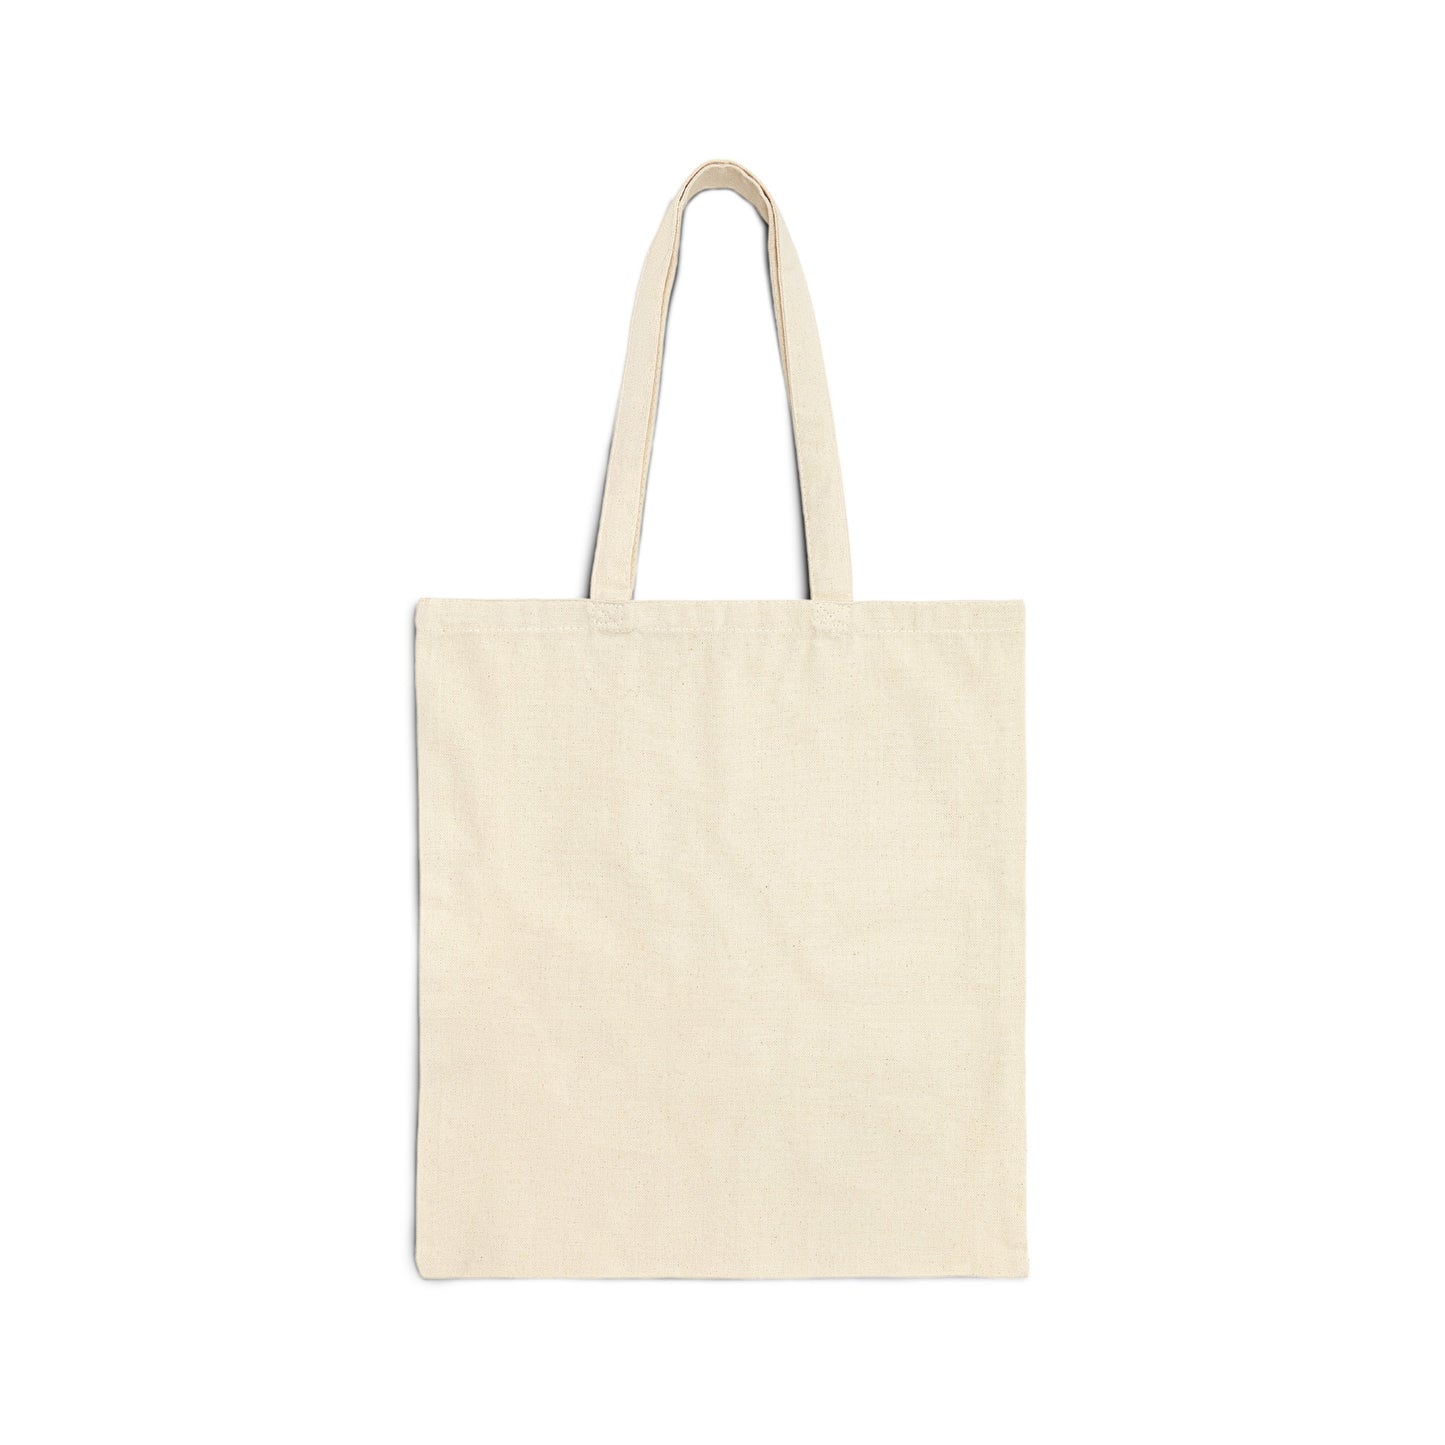 Anne of Green Gables Canvas Tote Bag